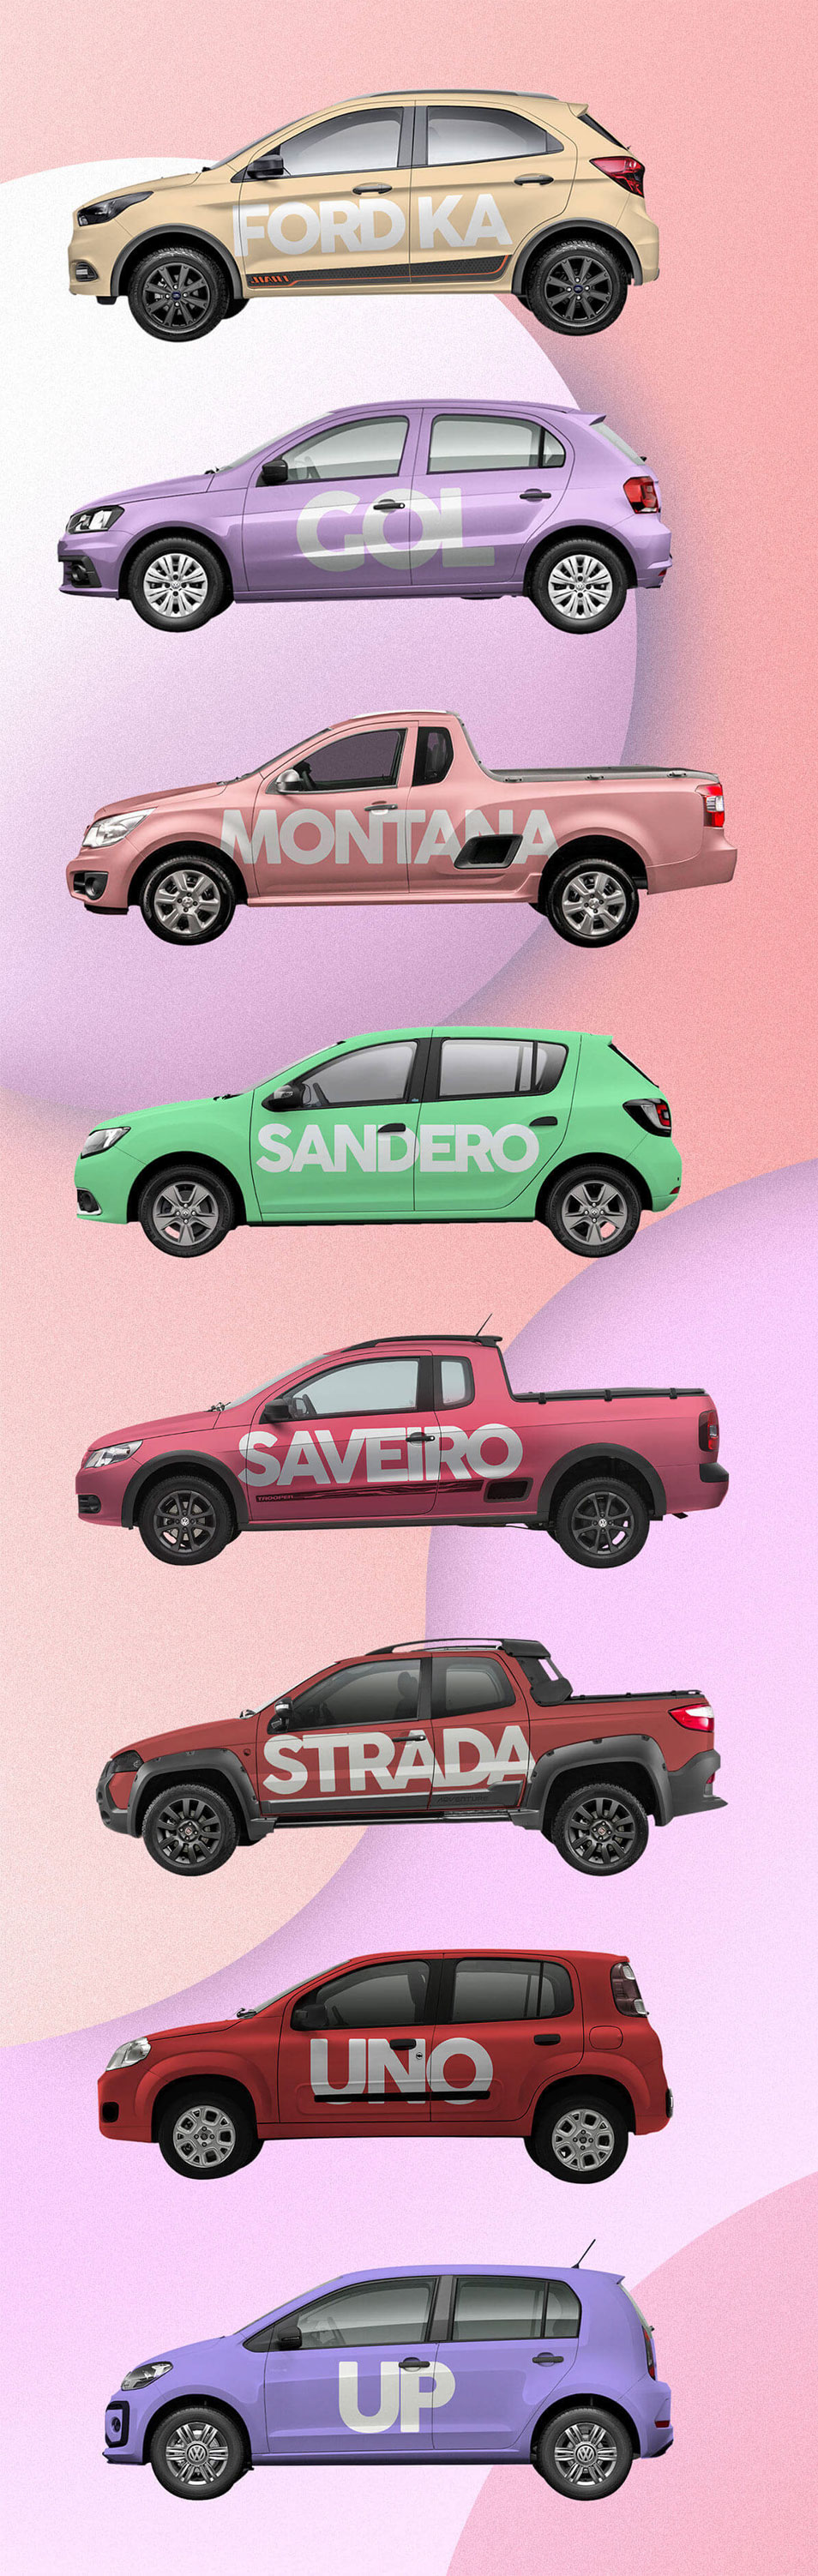 Download 7 Cars Mockup Template » CSS Author